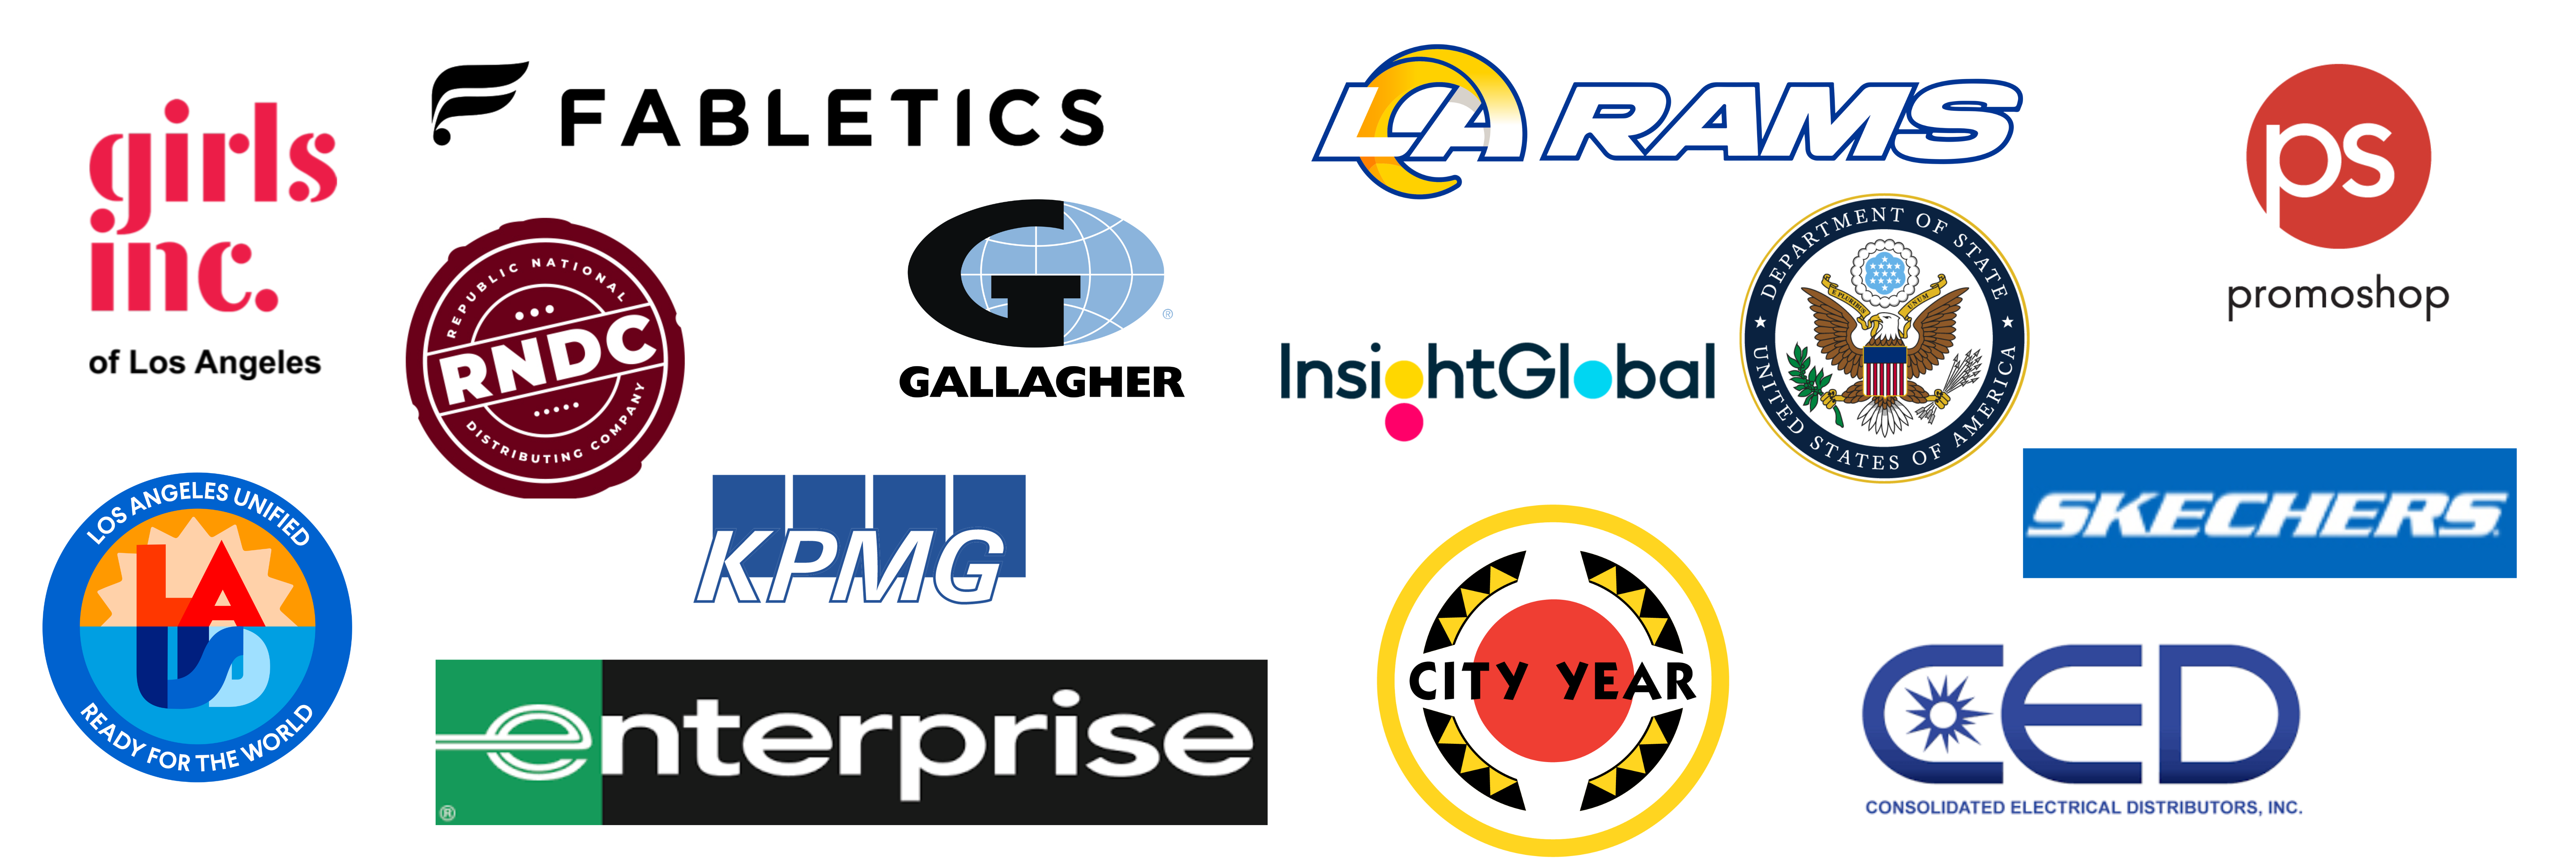 City Year, Consolidated Electrical Distributors, E. & J. Gallo Winery, Enterprise Holdings, Los Angeles Unified School District, Fabletics, Gallagher, Girls Inc., KPMG, Insight Global, Los Angeles Rams, U.S. Department of State, Promoshop